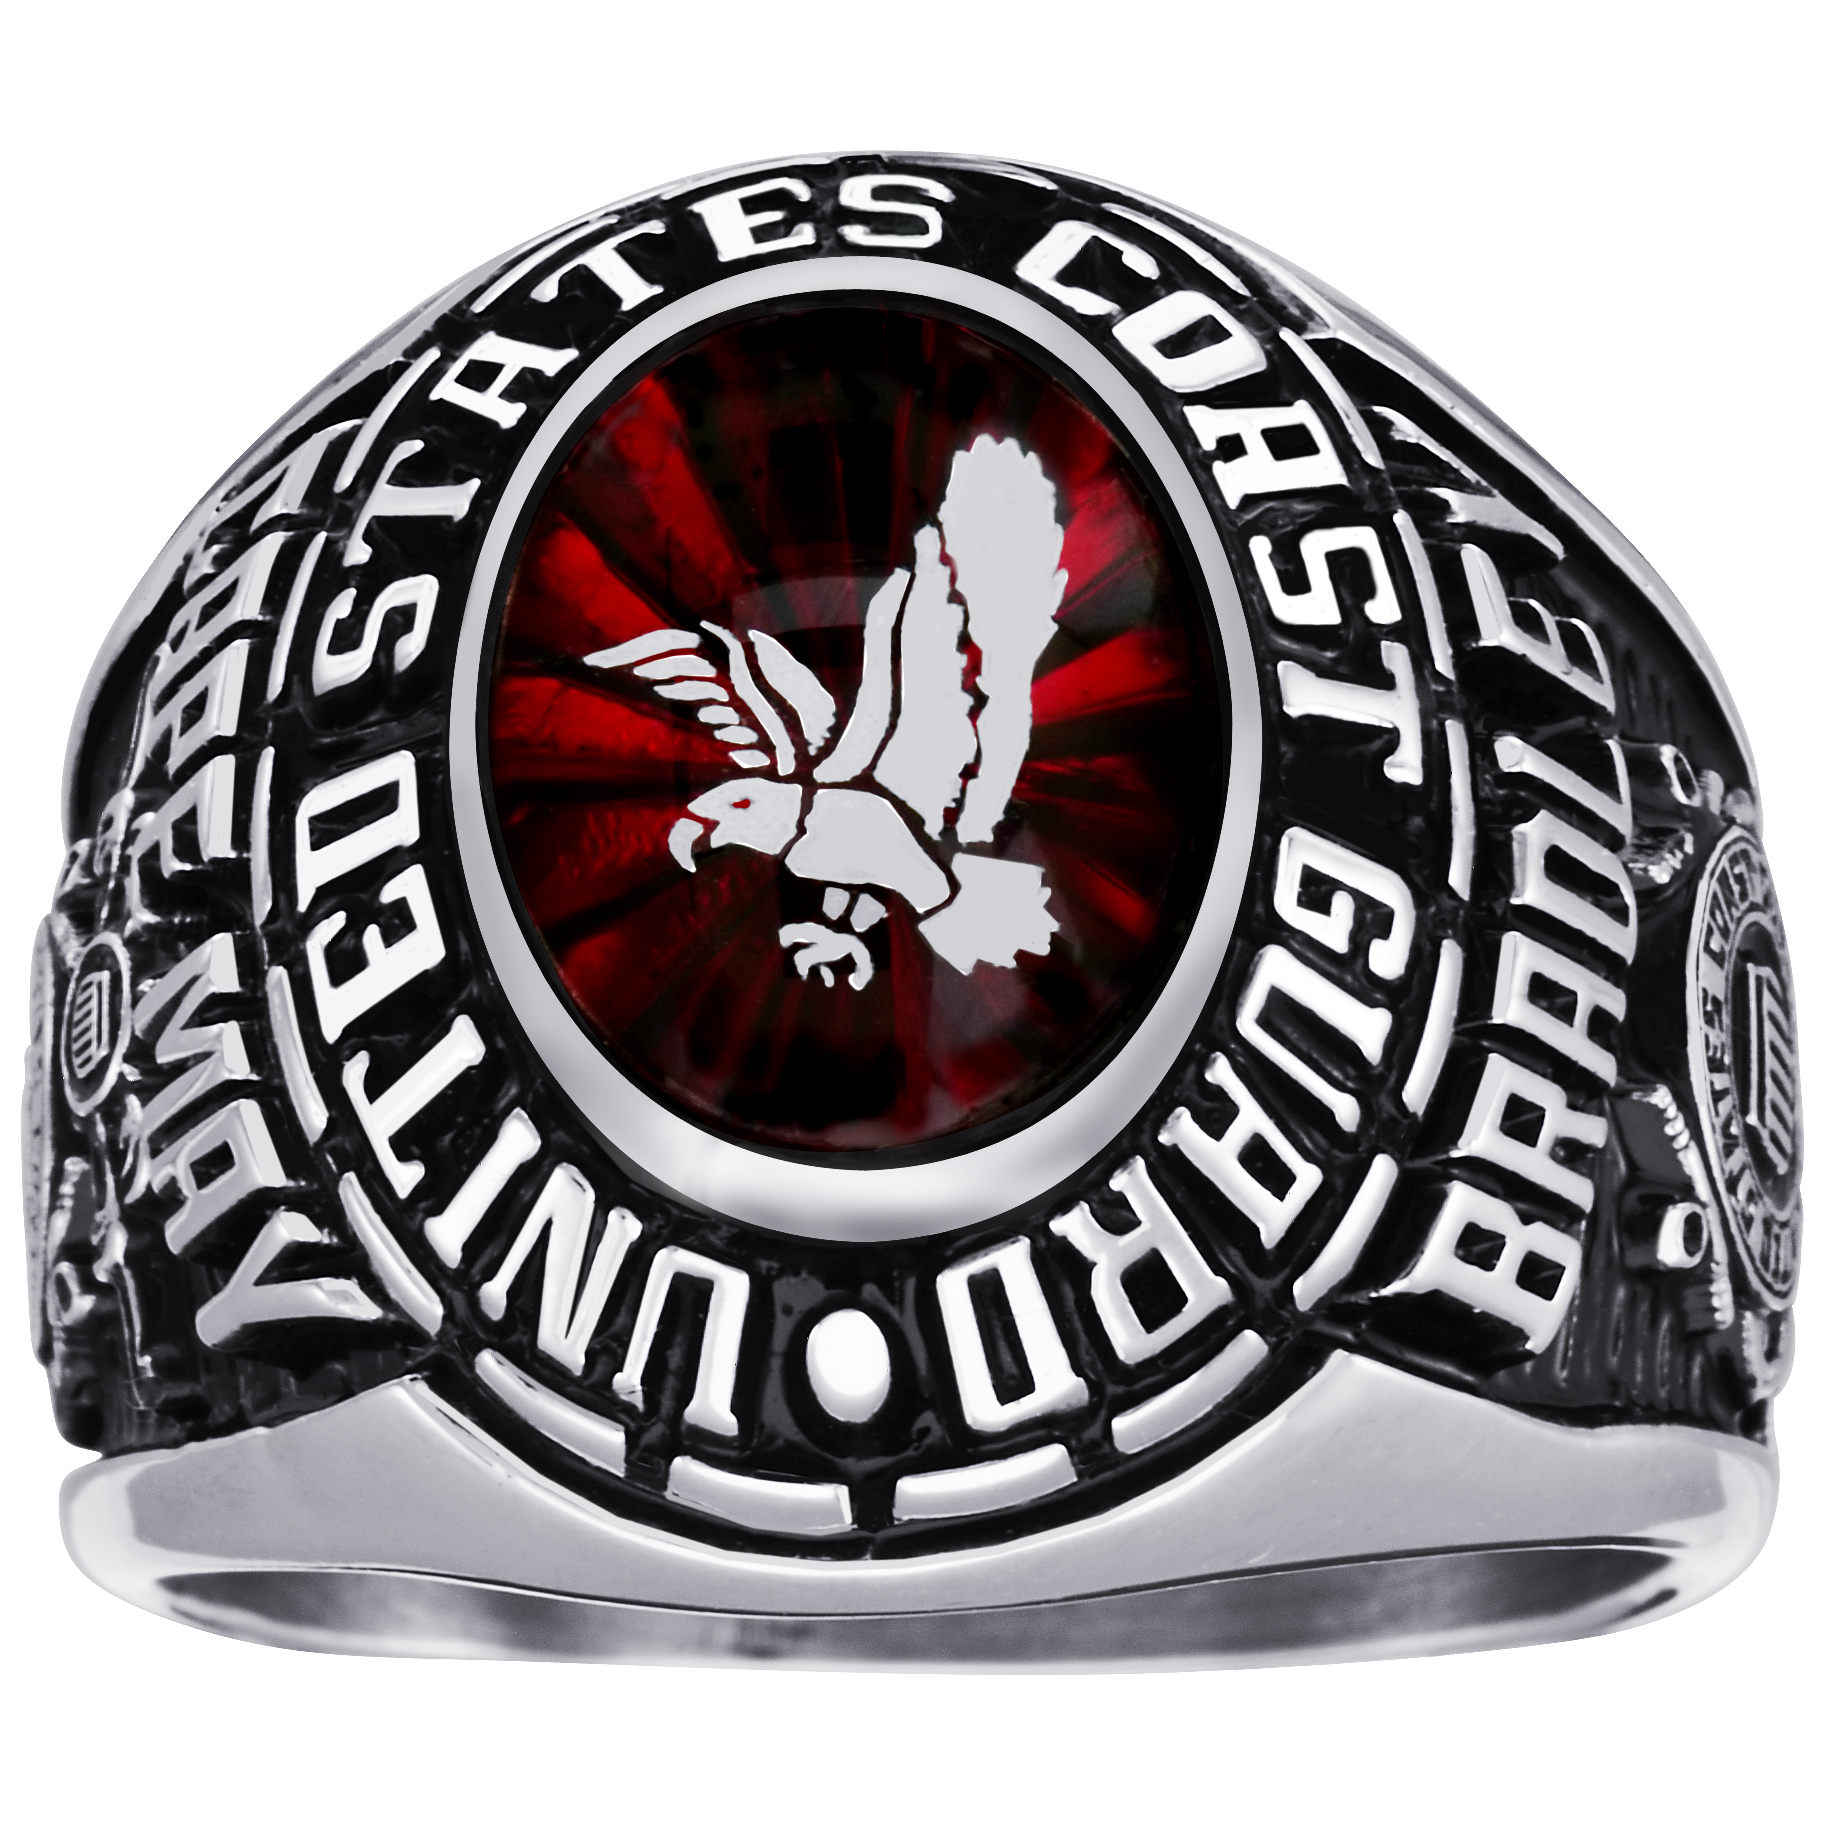 Image of Men's Freedom Military Ring